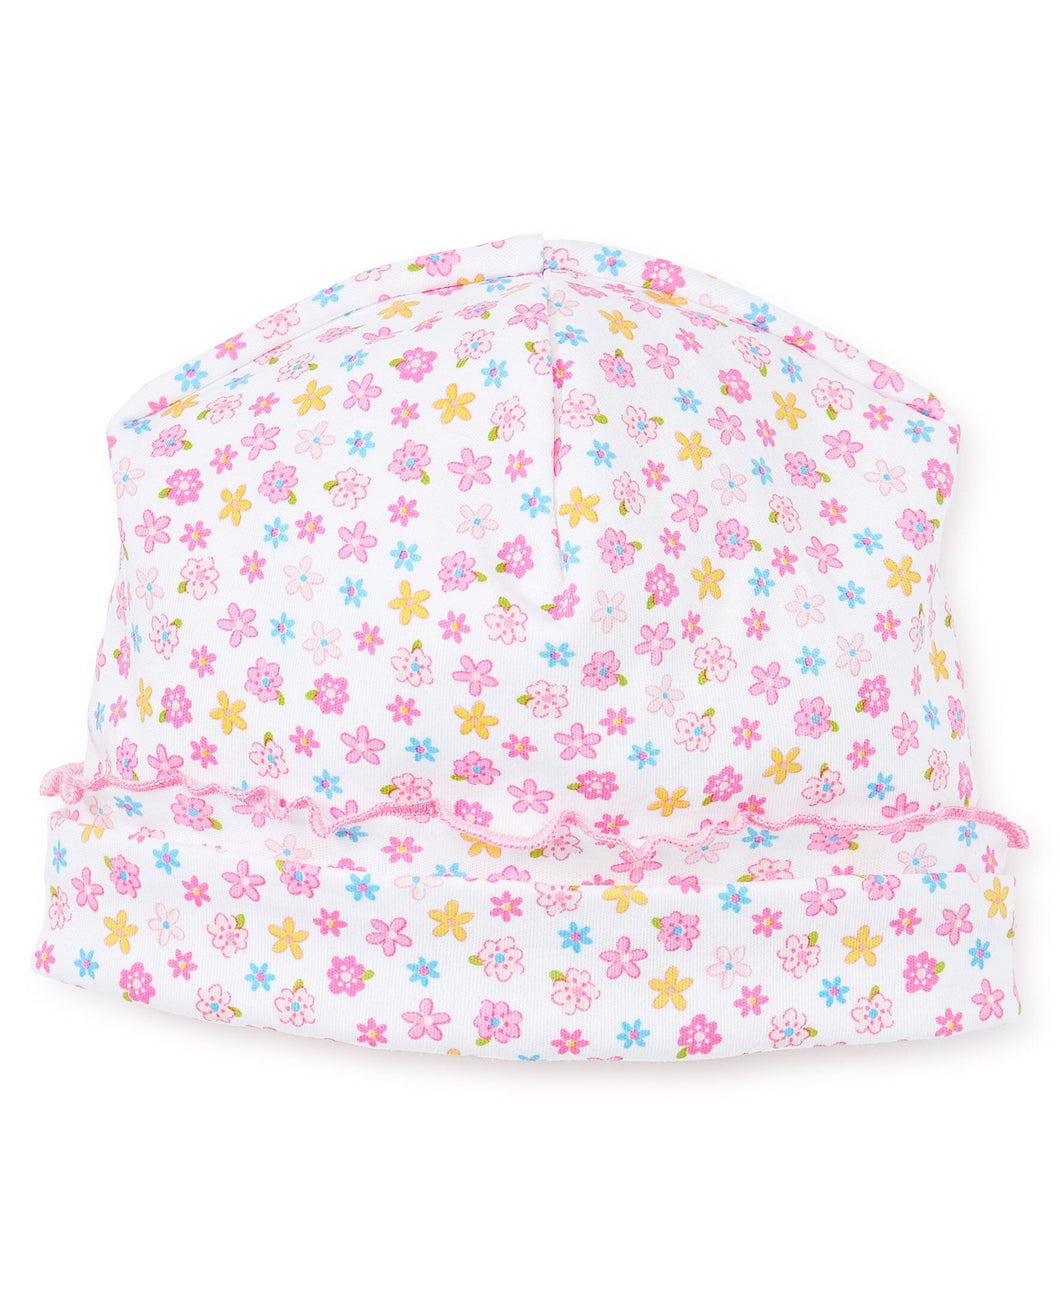 Pineapples Complementary Print Infant Hat